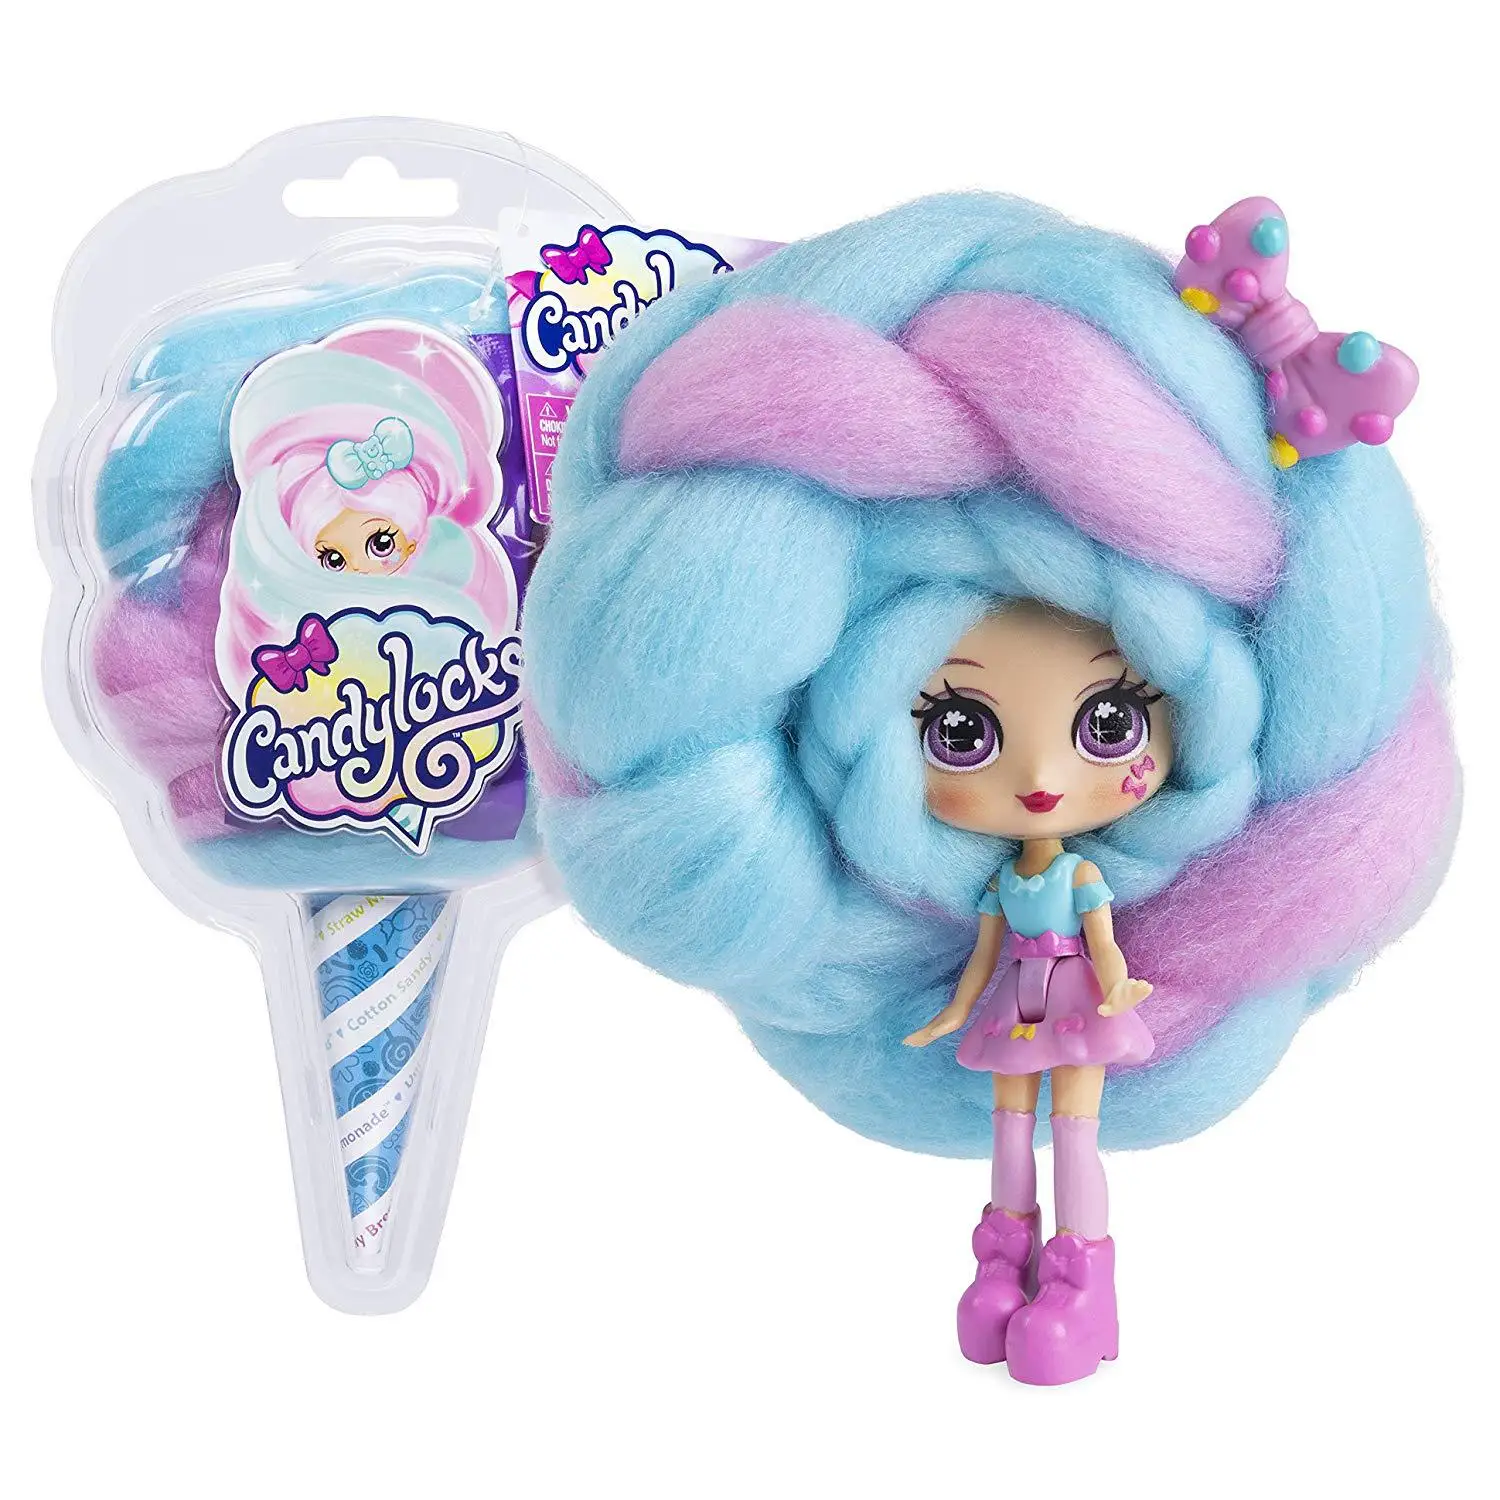 Surprise Blind Box Cotton Candy Hairdressing Doll Girl Diy Hairstyle  Puppets Kawaii Doll Toys For Children Collection Model Doll - Blind Box -  AliExpress